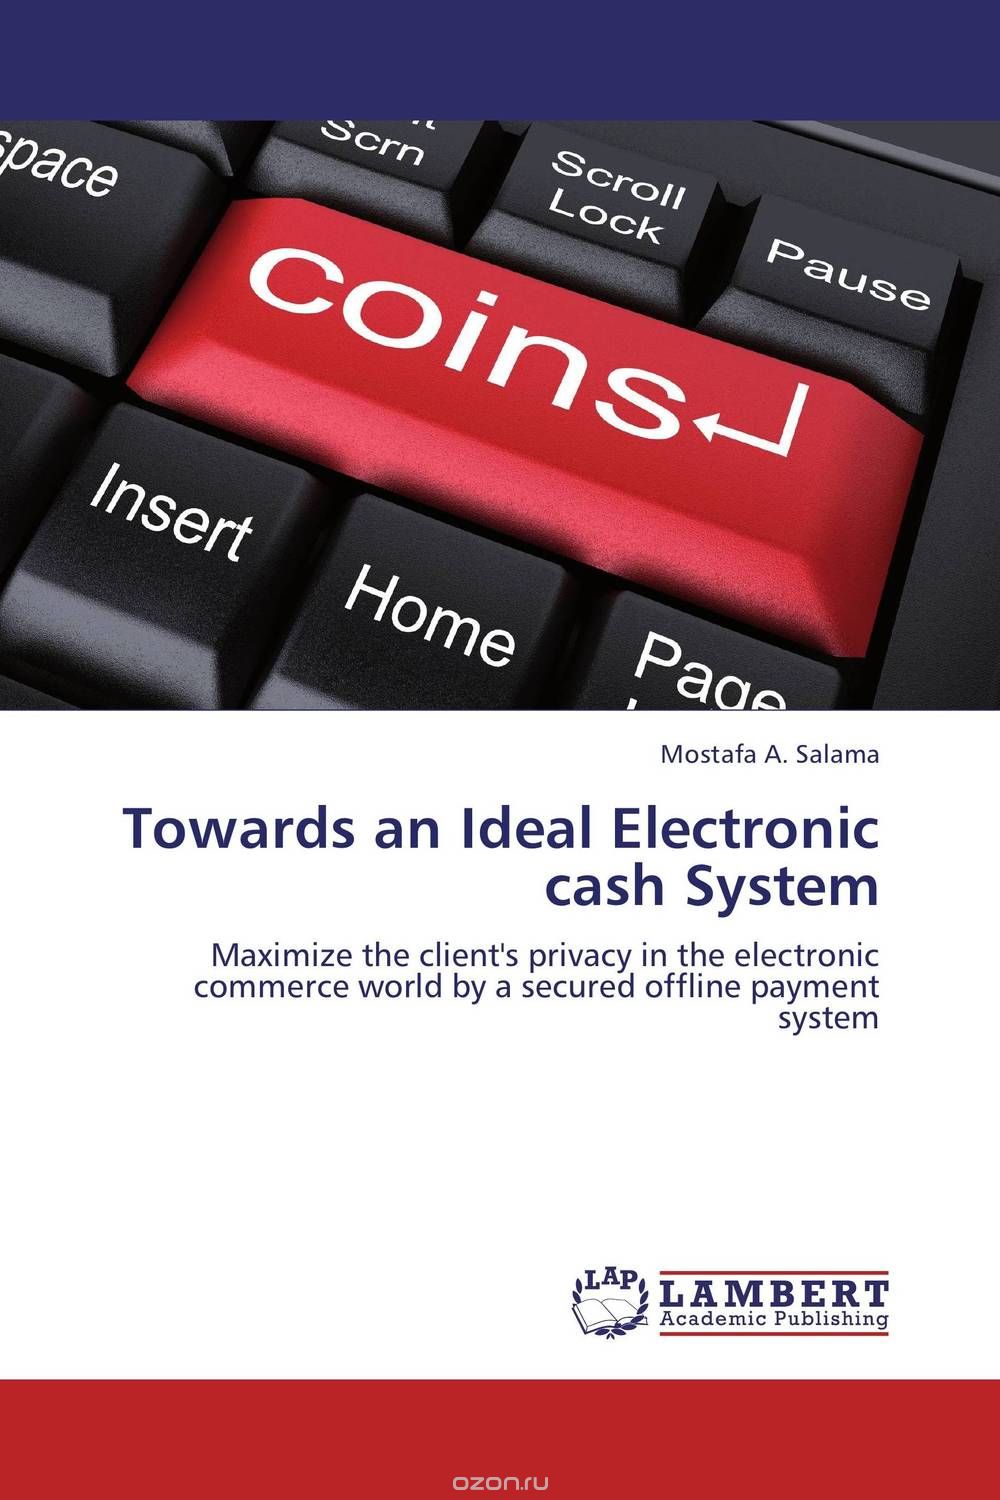 Towards an Ideal Electronic cash System